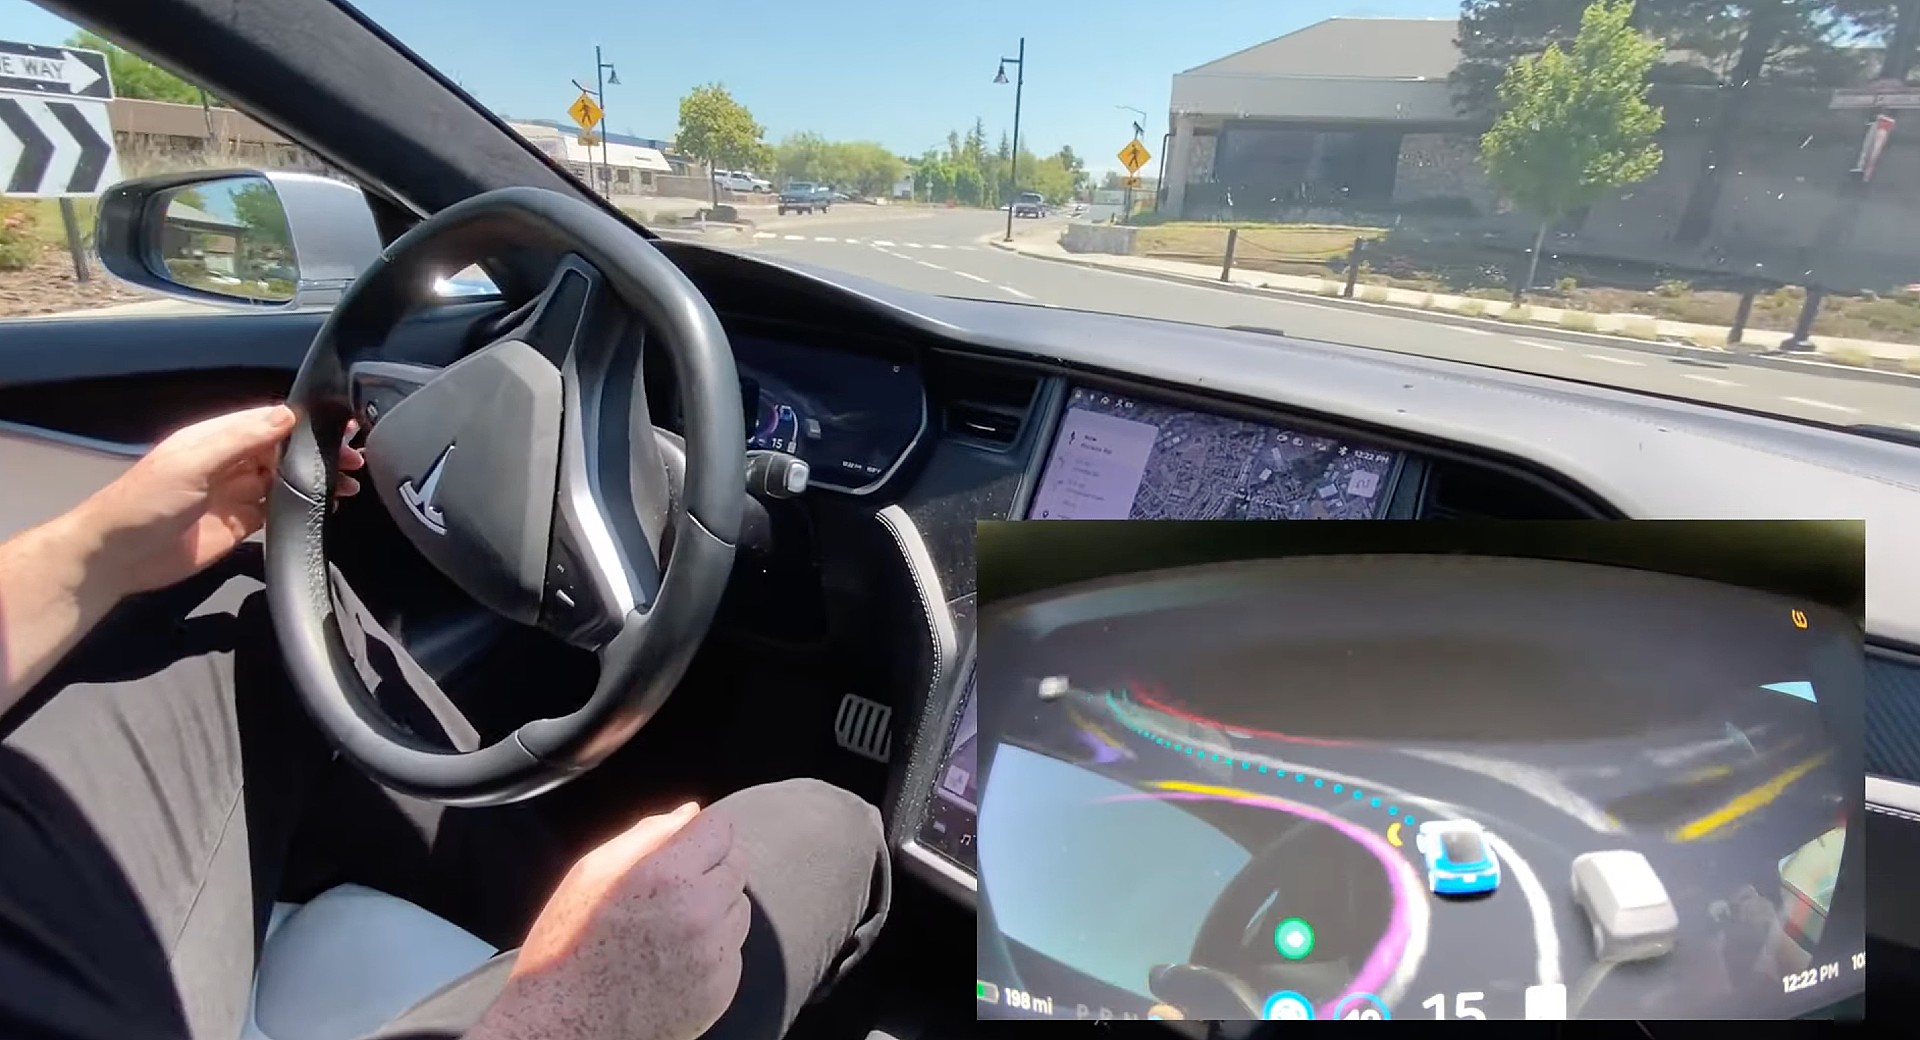 How to Turn on Hazards in Tesla? 